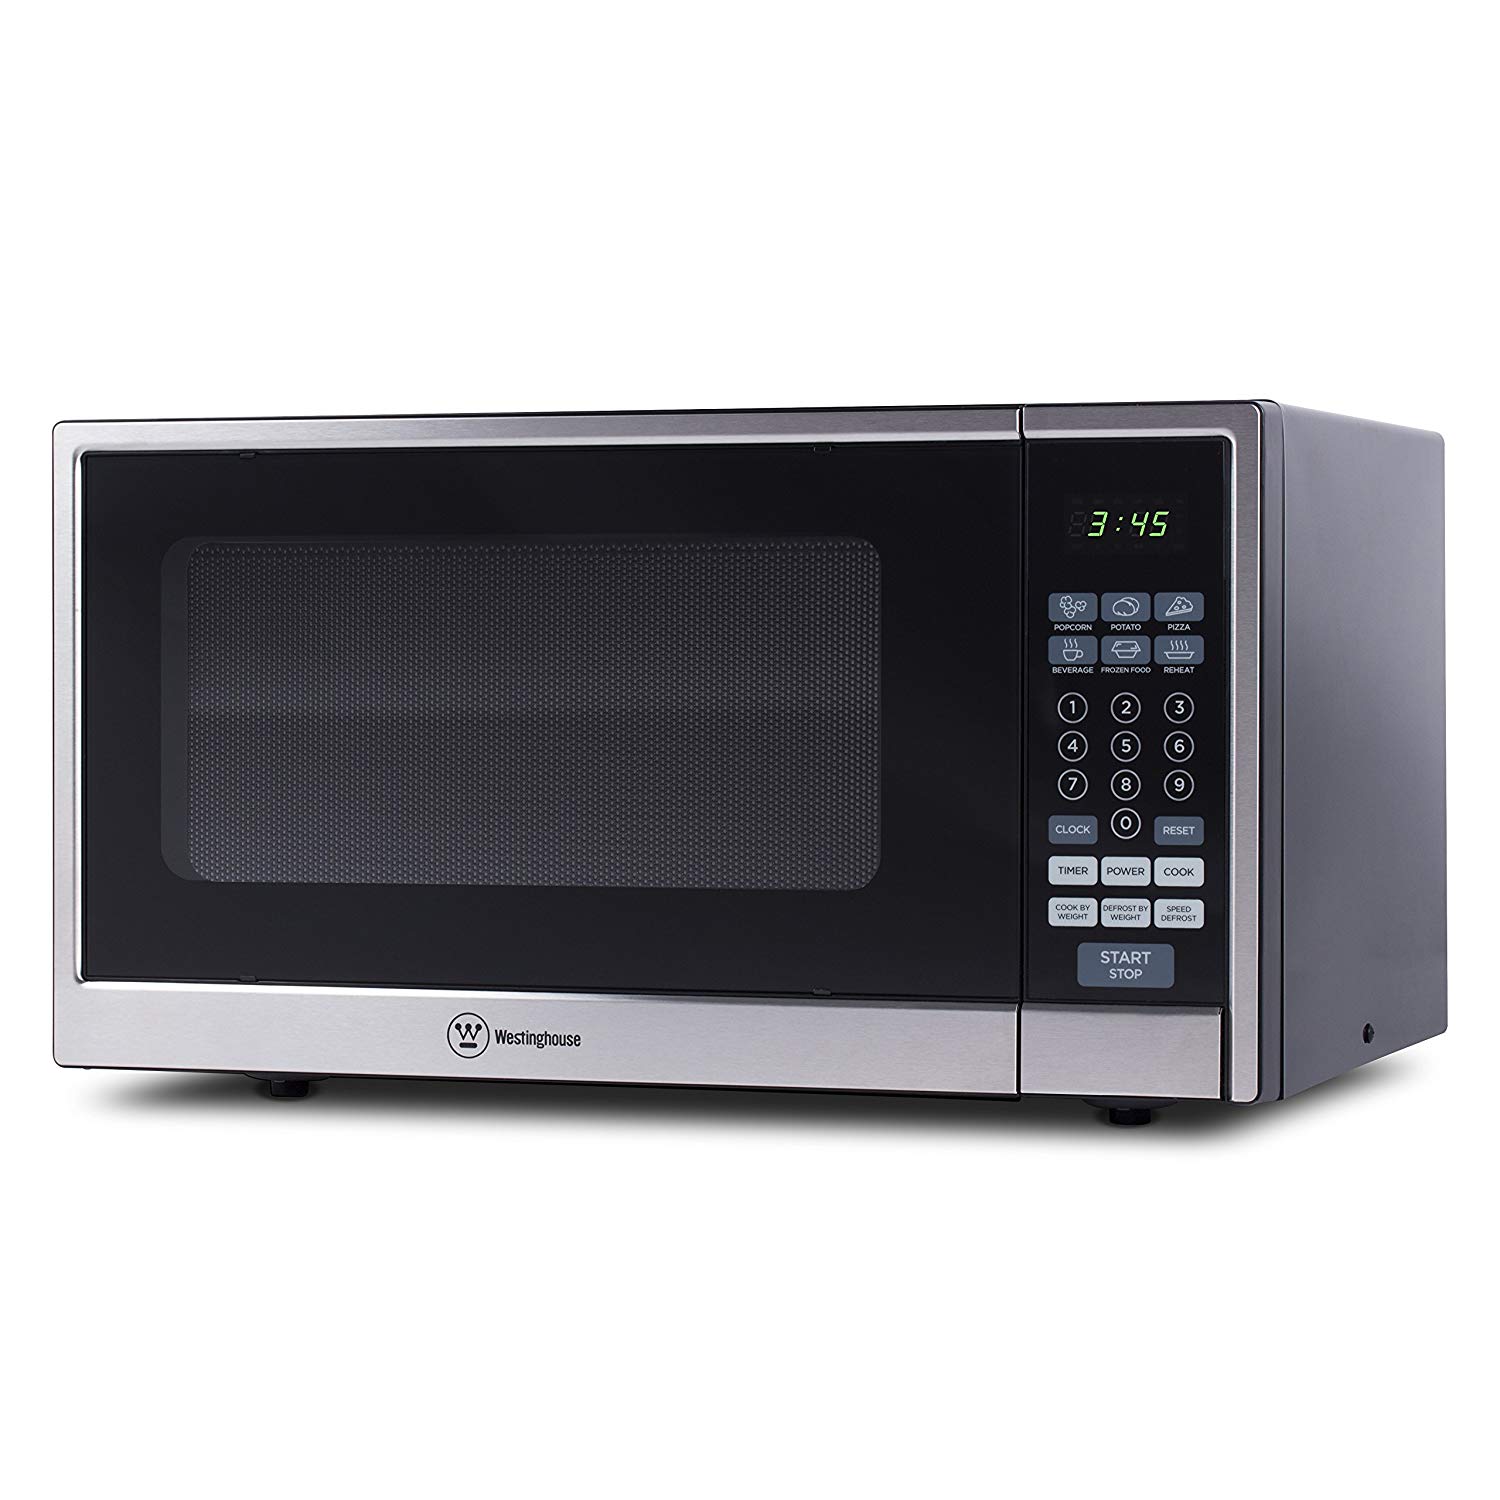 Westinghouse WCM11100SS 1000W 1.1 Cubic Feet Countertop Microwave Oven (Stainless Steel Front)